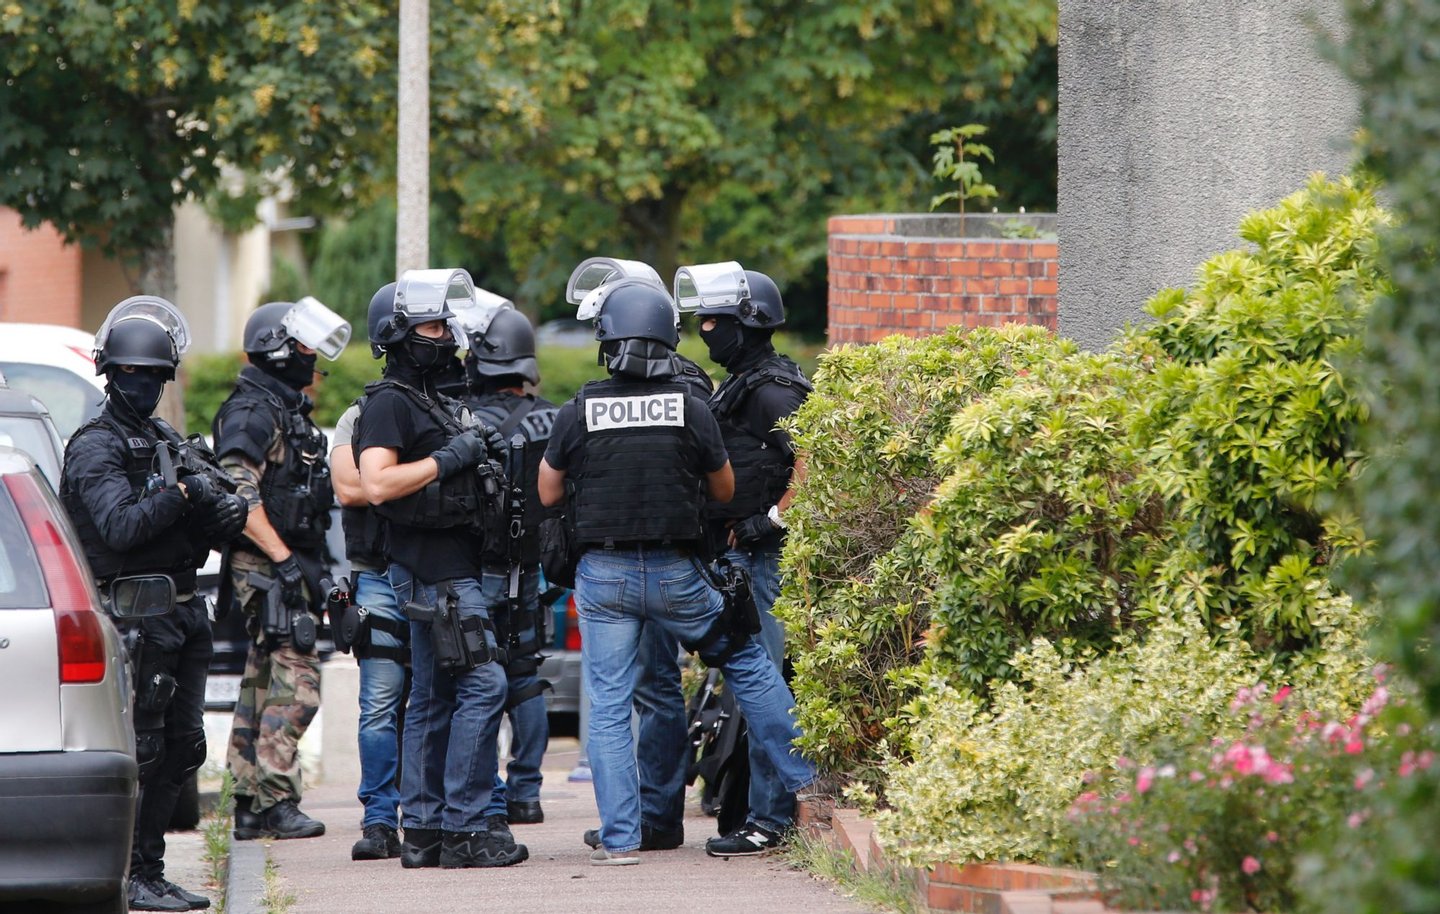 French policemen stand in a street during a search in a house on July 26, 2016 in the Normandy village of Saint-Etienne du Rouvray after a priest was killed in the latest of a string of attacks against Western targets claimed by or blamed on the Islamic State jihadist group. French President said that two men who attacked a church and slit the throat of a priest had "claimed to be from Daesh", using the Arabic name for the Islamic State group. Police said they killed two hostage-takers in the attack in the Normandy town of Saint-Etienne-du-Rouvray, 125 kilometres (77 miles) north of Paris. / AFP / MATTHIEU ALEXANDRE (Photo credit should read MATTHIEU ALEXANDRE/AFP/Getty Images)